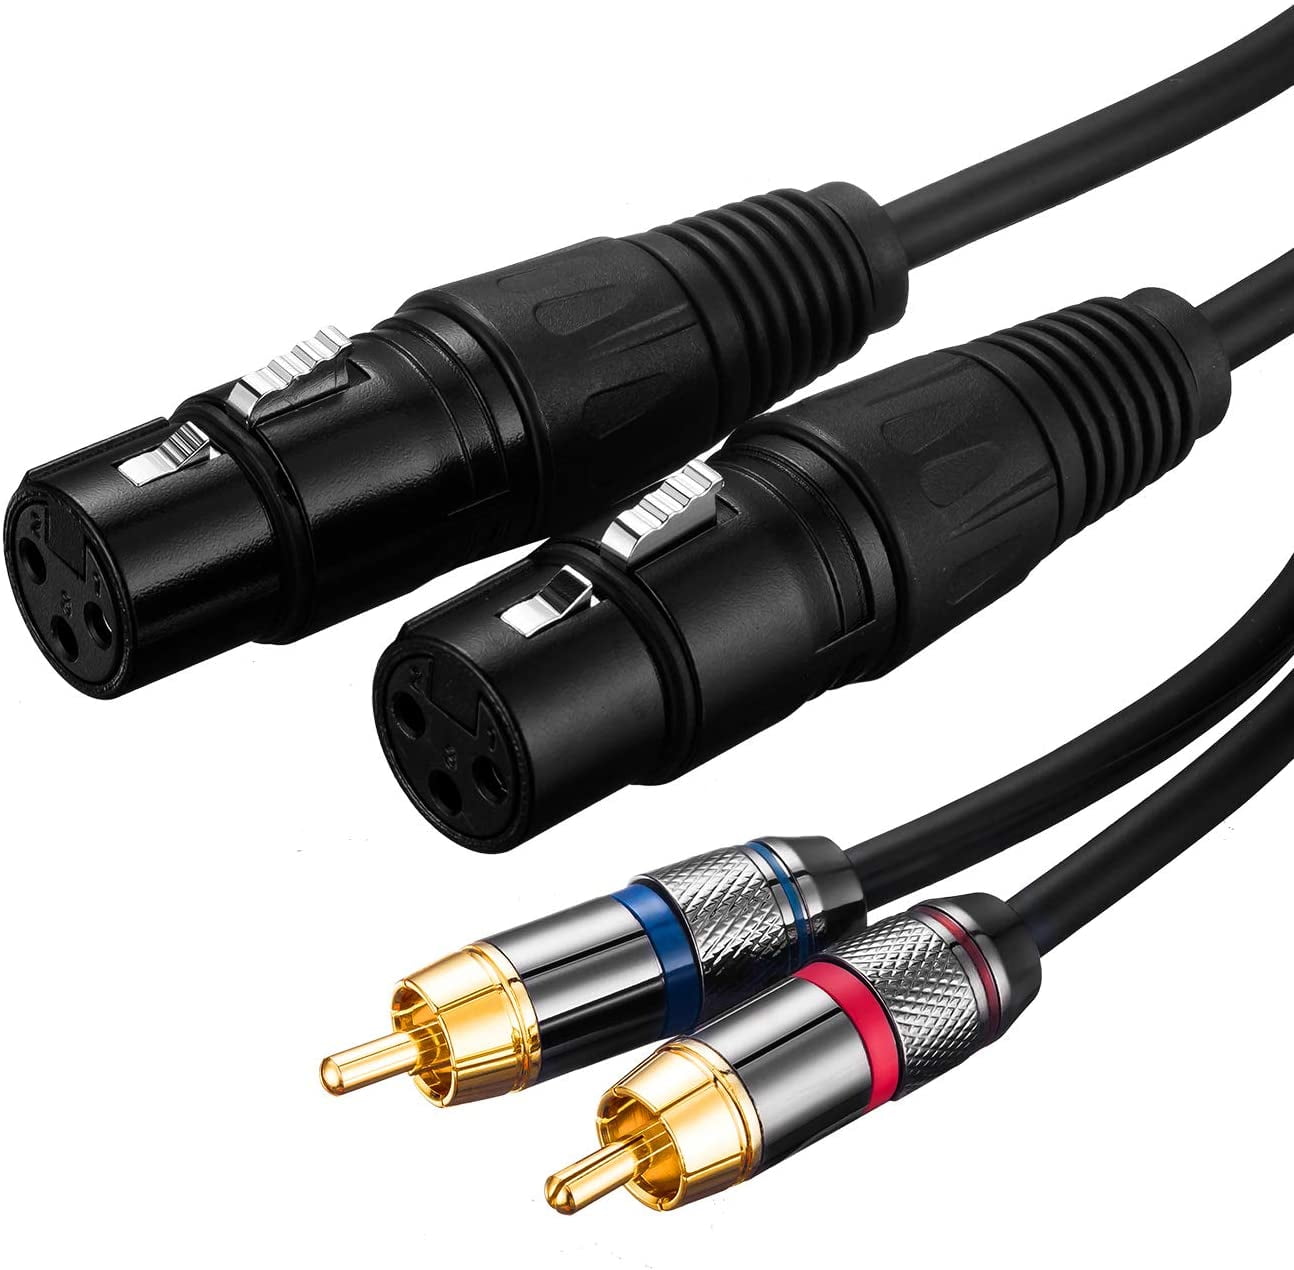 for Amplifier Mixer Microphone Dual RCA Male to Dual XLR Male Cable 4N OFC Wire 5 Feet JOLGOO RCA to XLR Cable 2 RCA Male to 2 XLR Male HiFi Audio Cable 